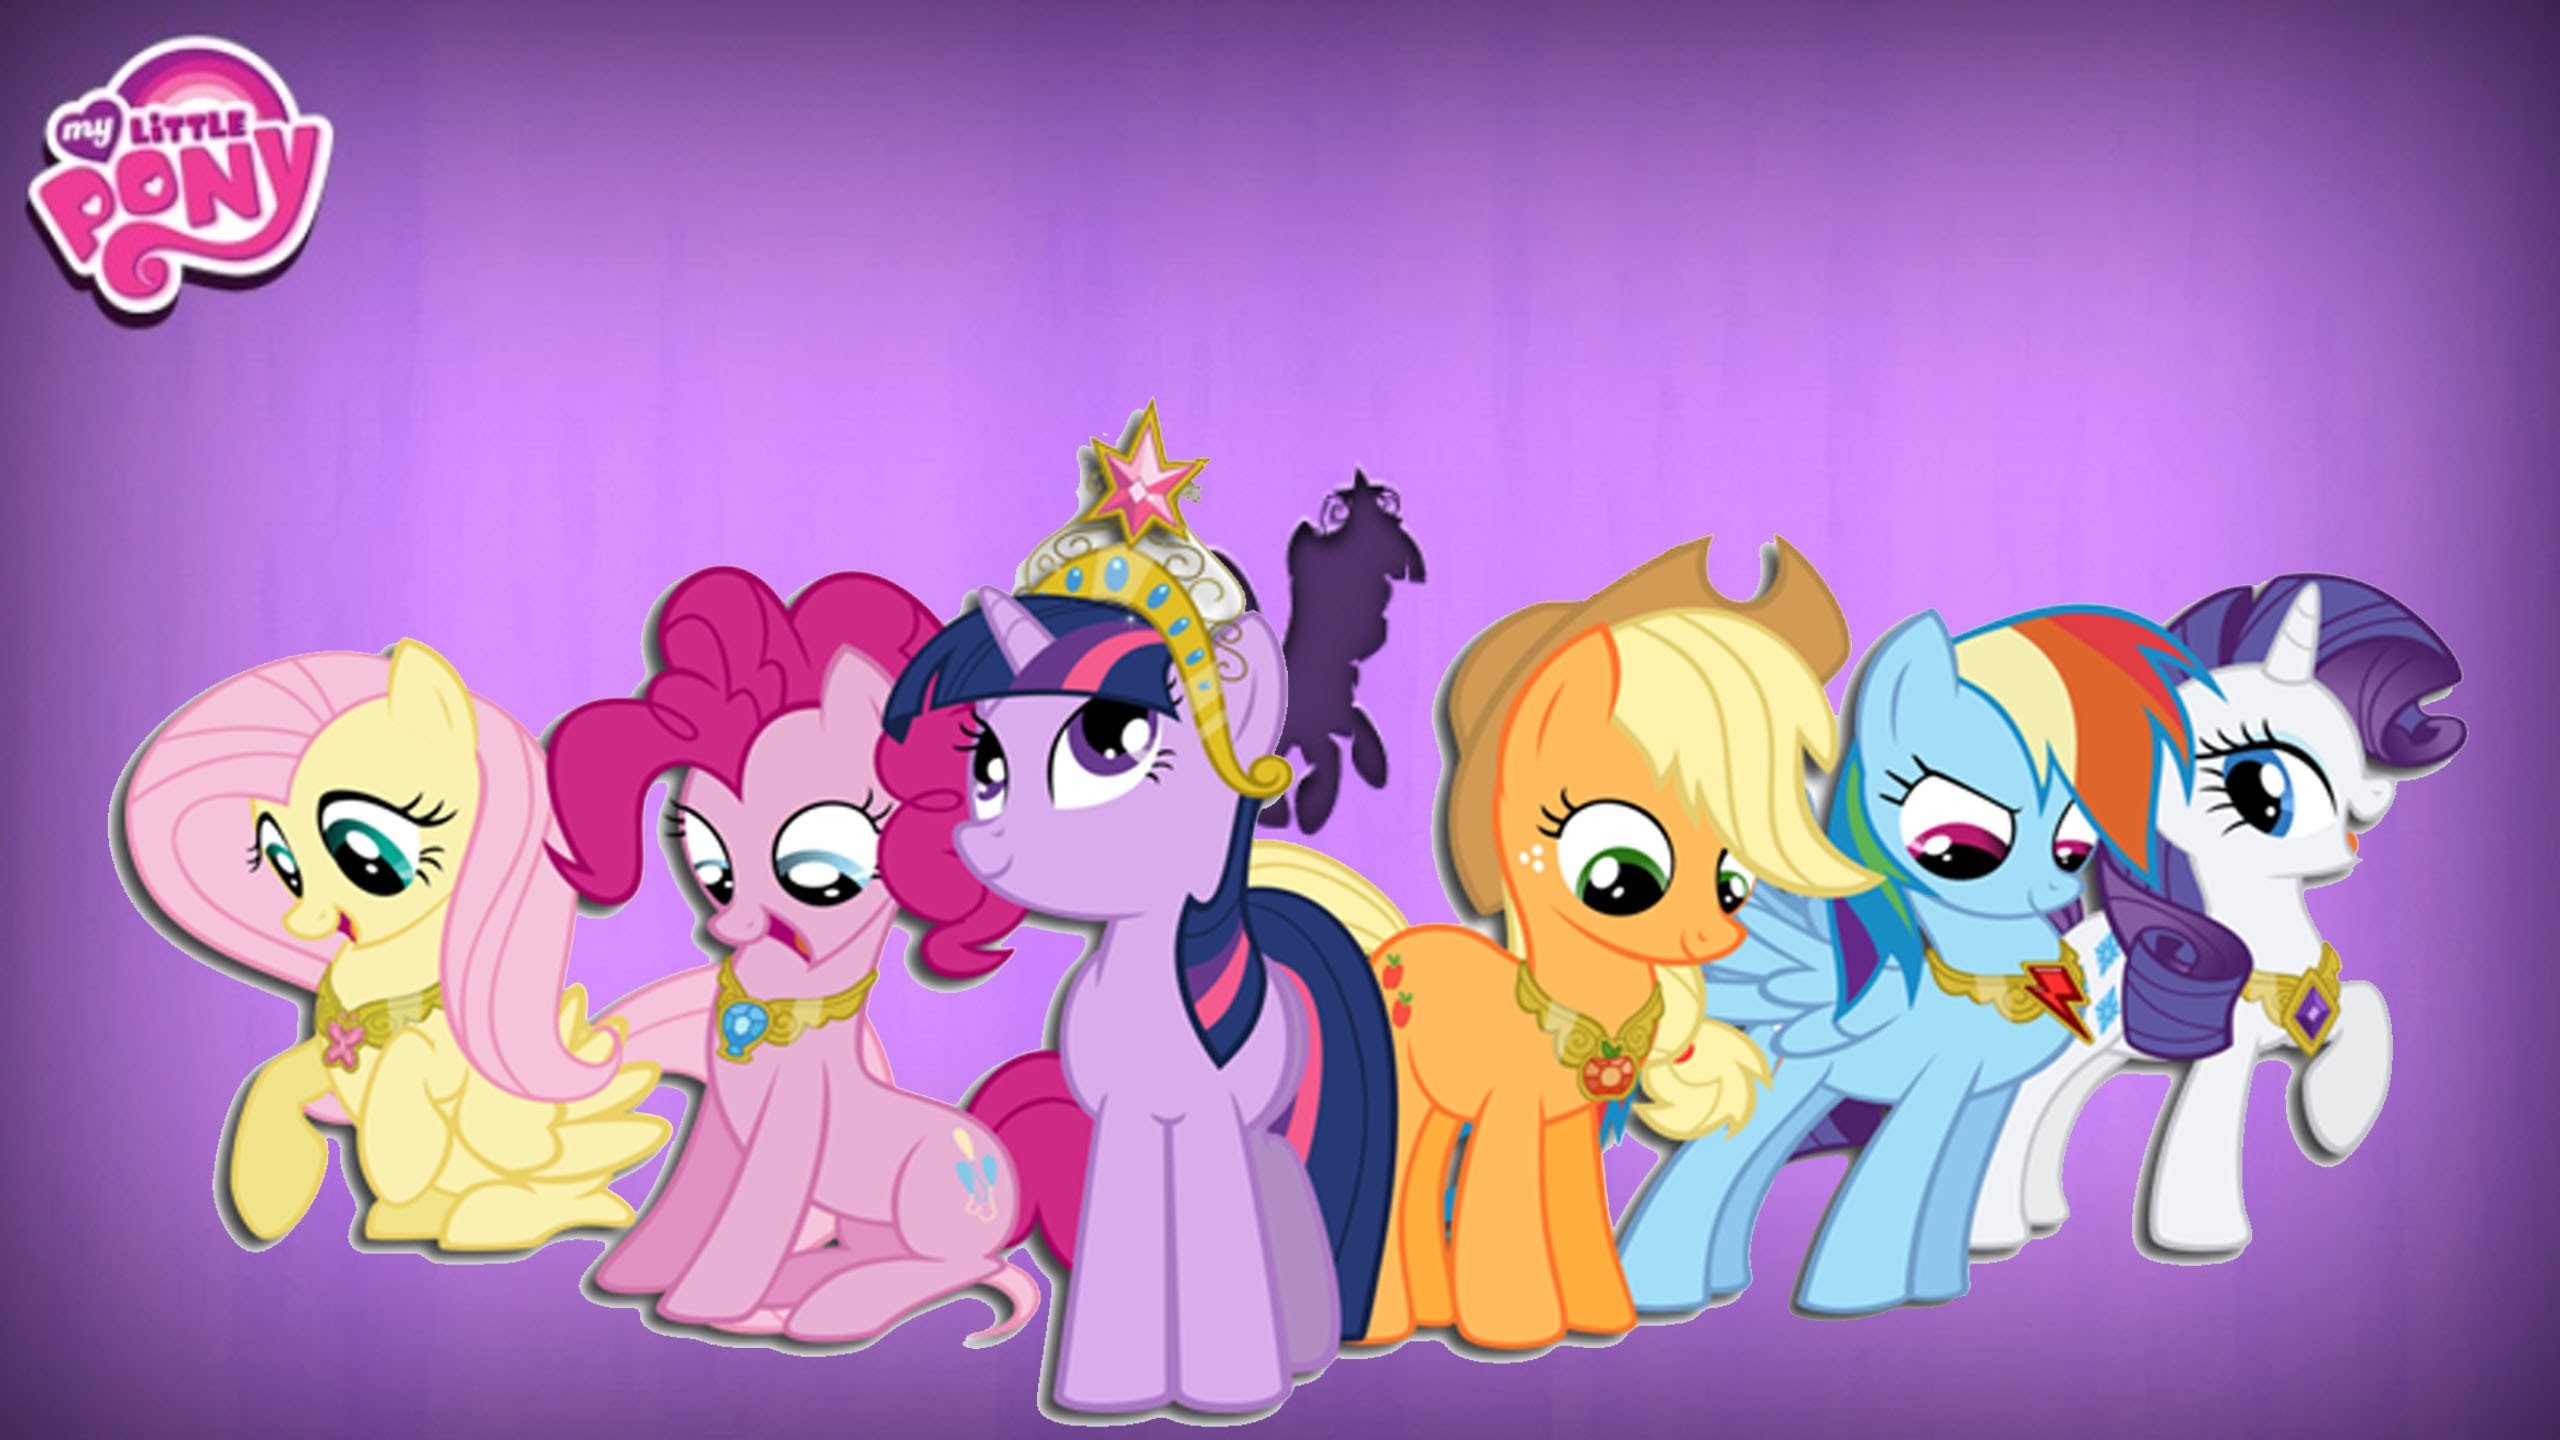 2560x1440 My Little Pony Cartoon TV Games Full Movie Episode All Seasons in One My  Little Pony - YouTube